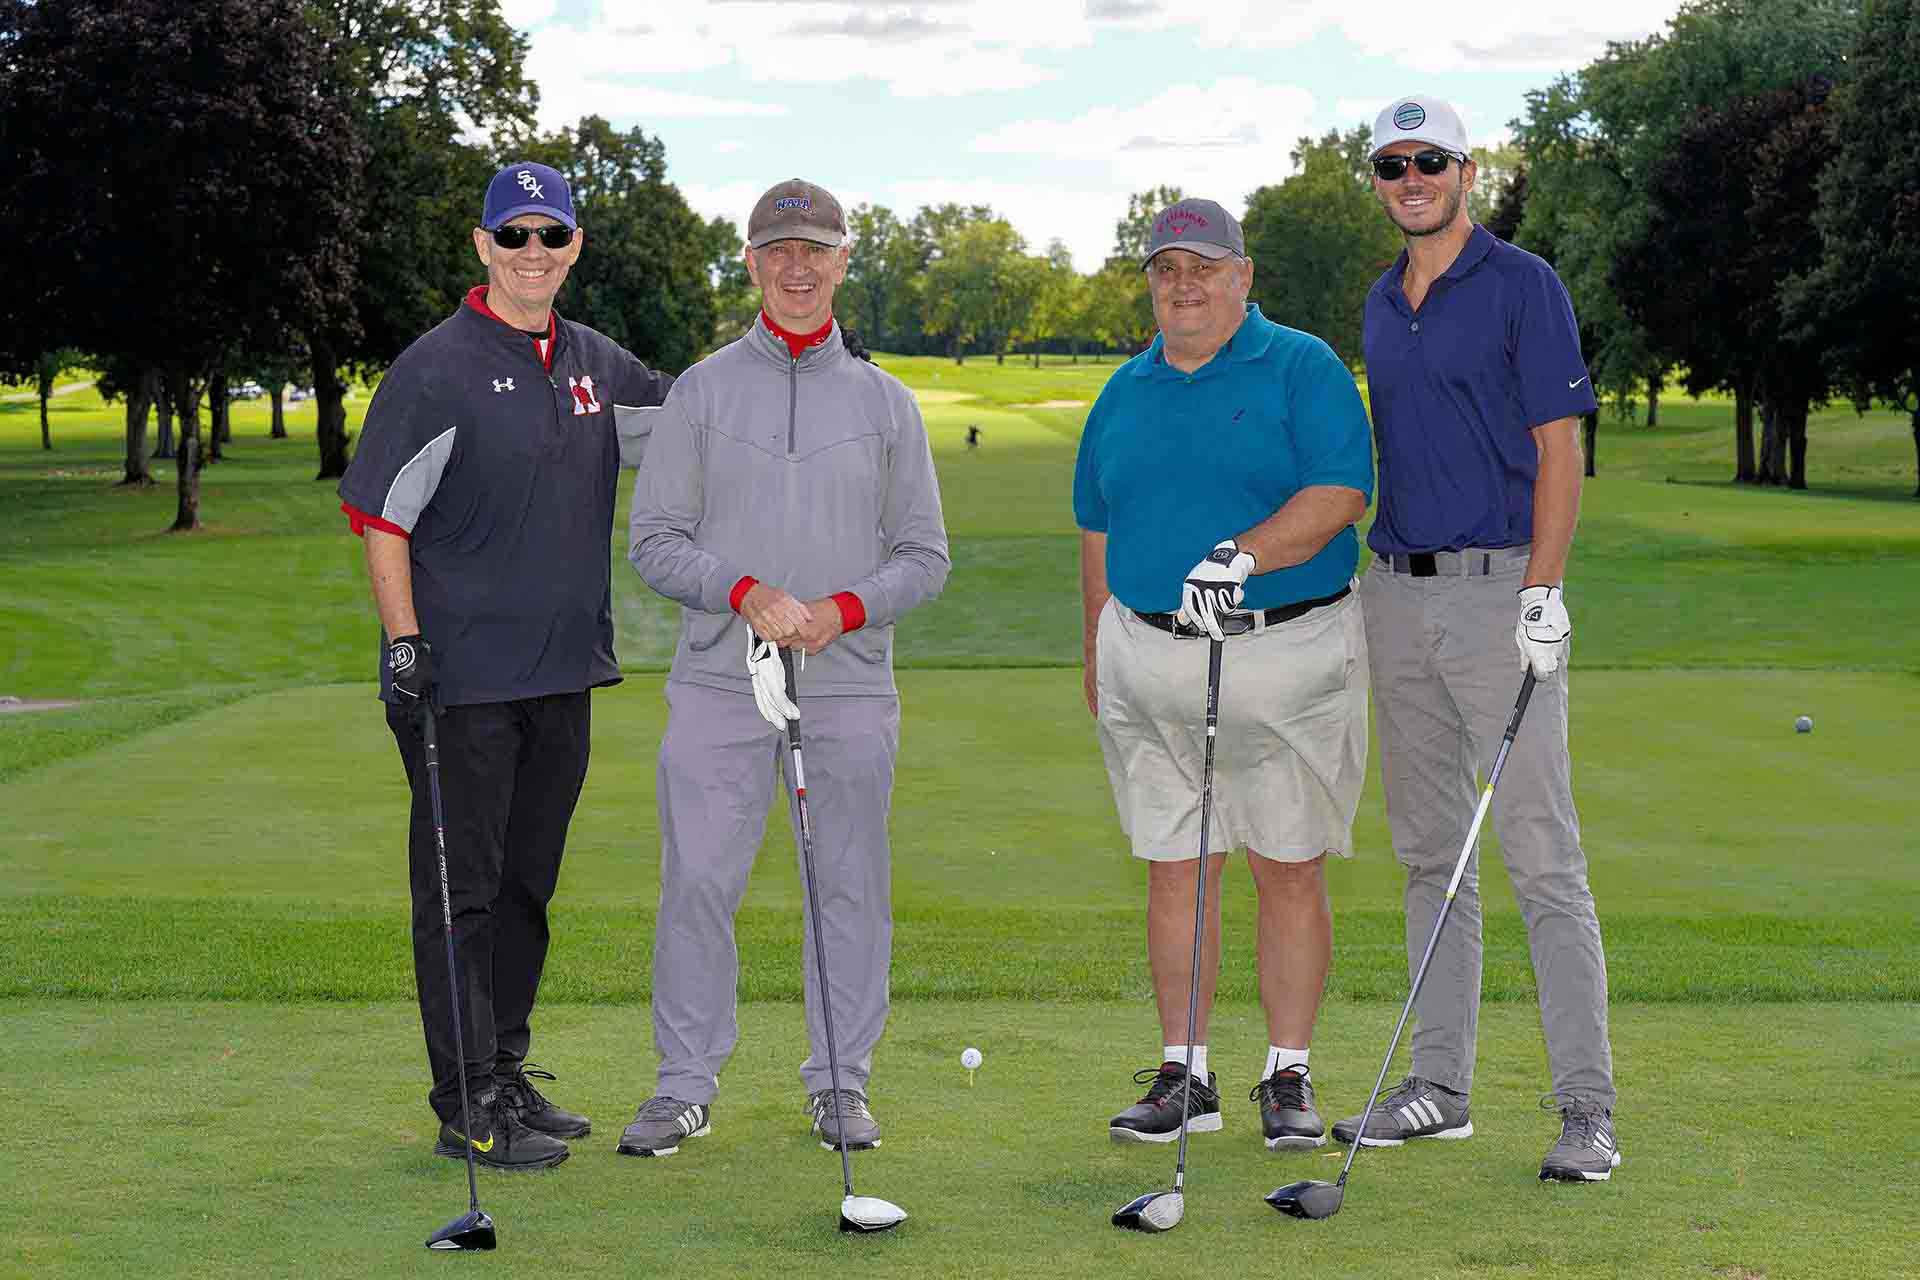 2020-endownment-classic-four-people-smiling-for-photo-on-golf-course